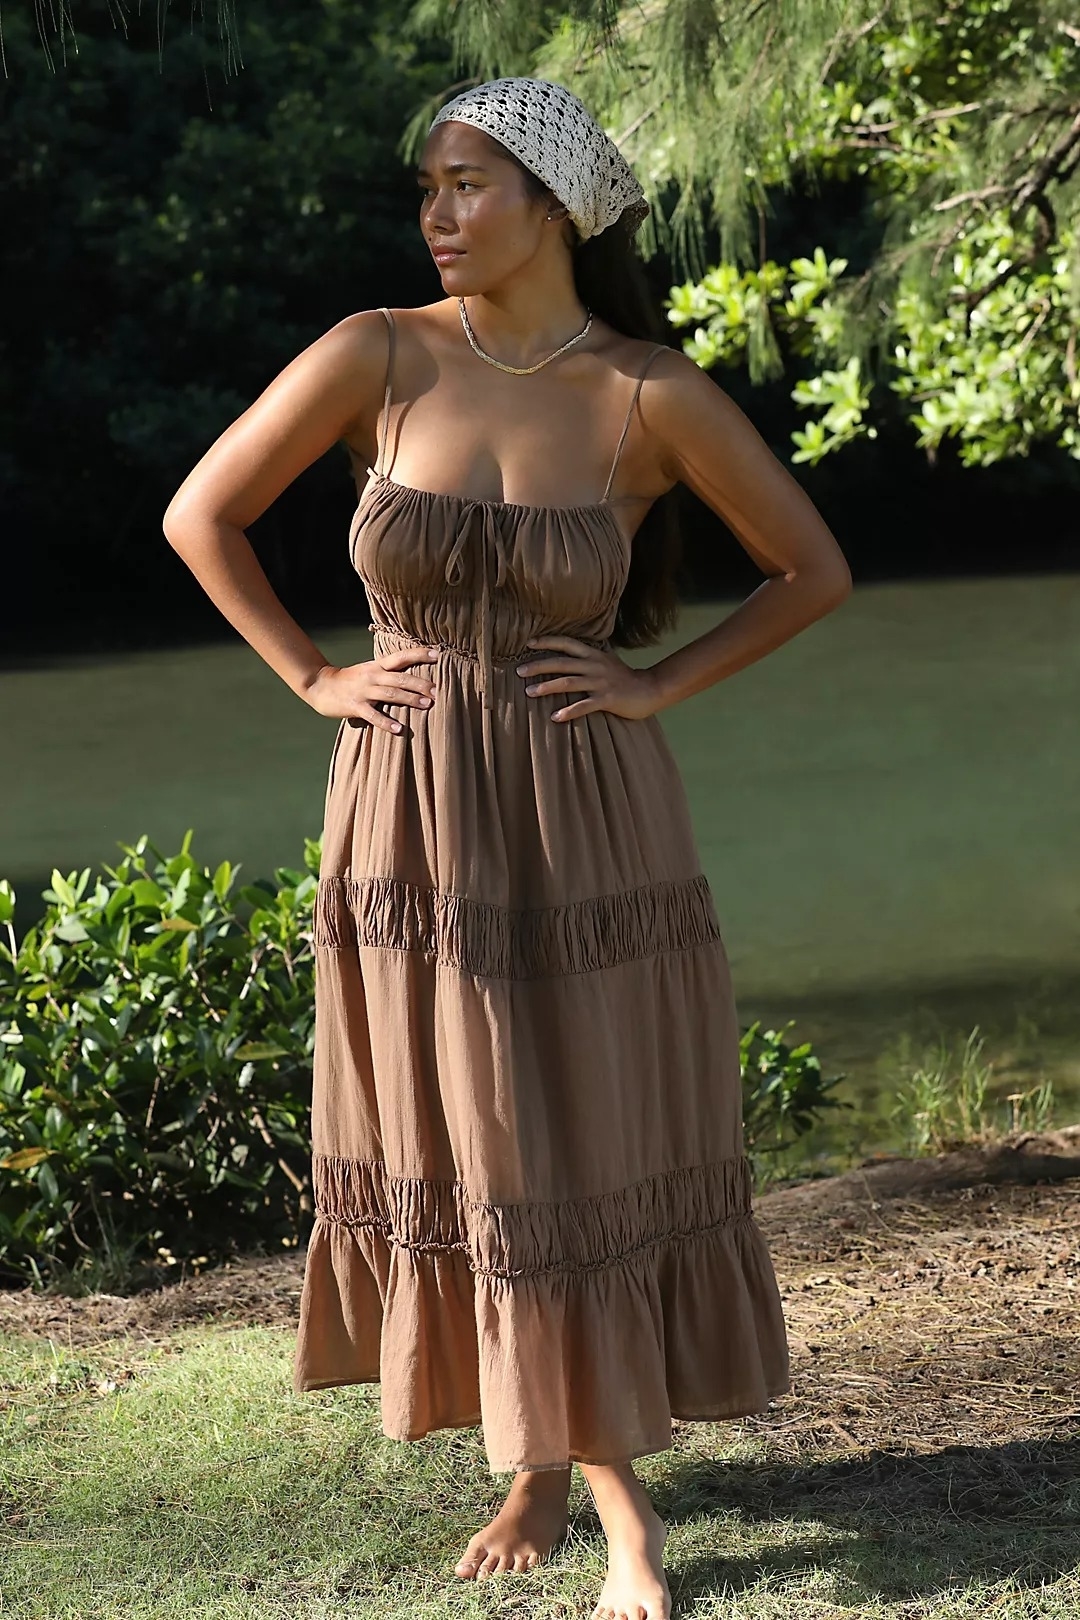 model in a tiered, sleeveless dress stands outdoors with hands on hips